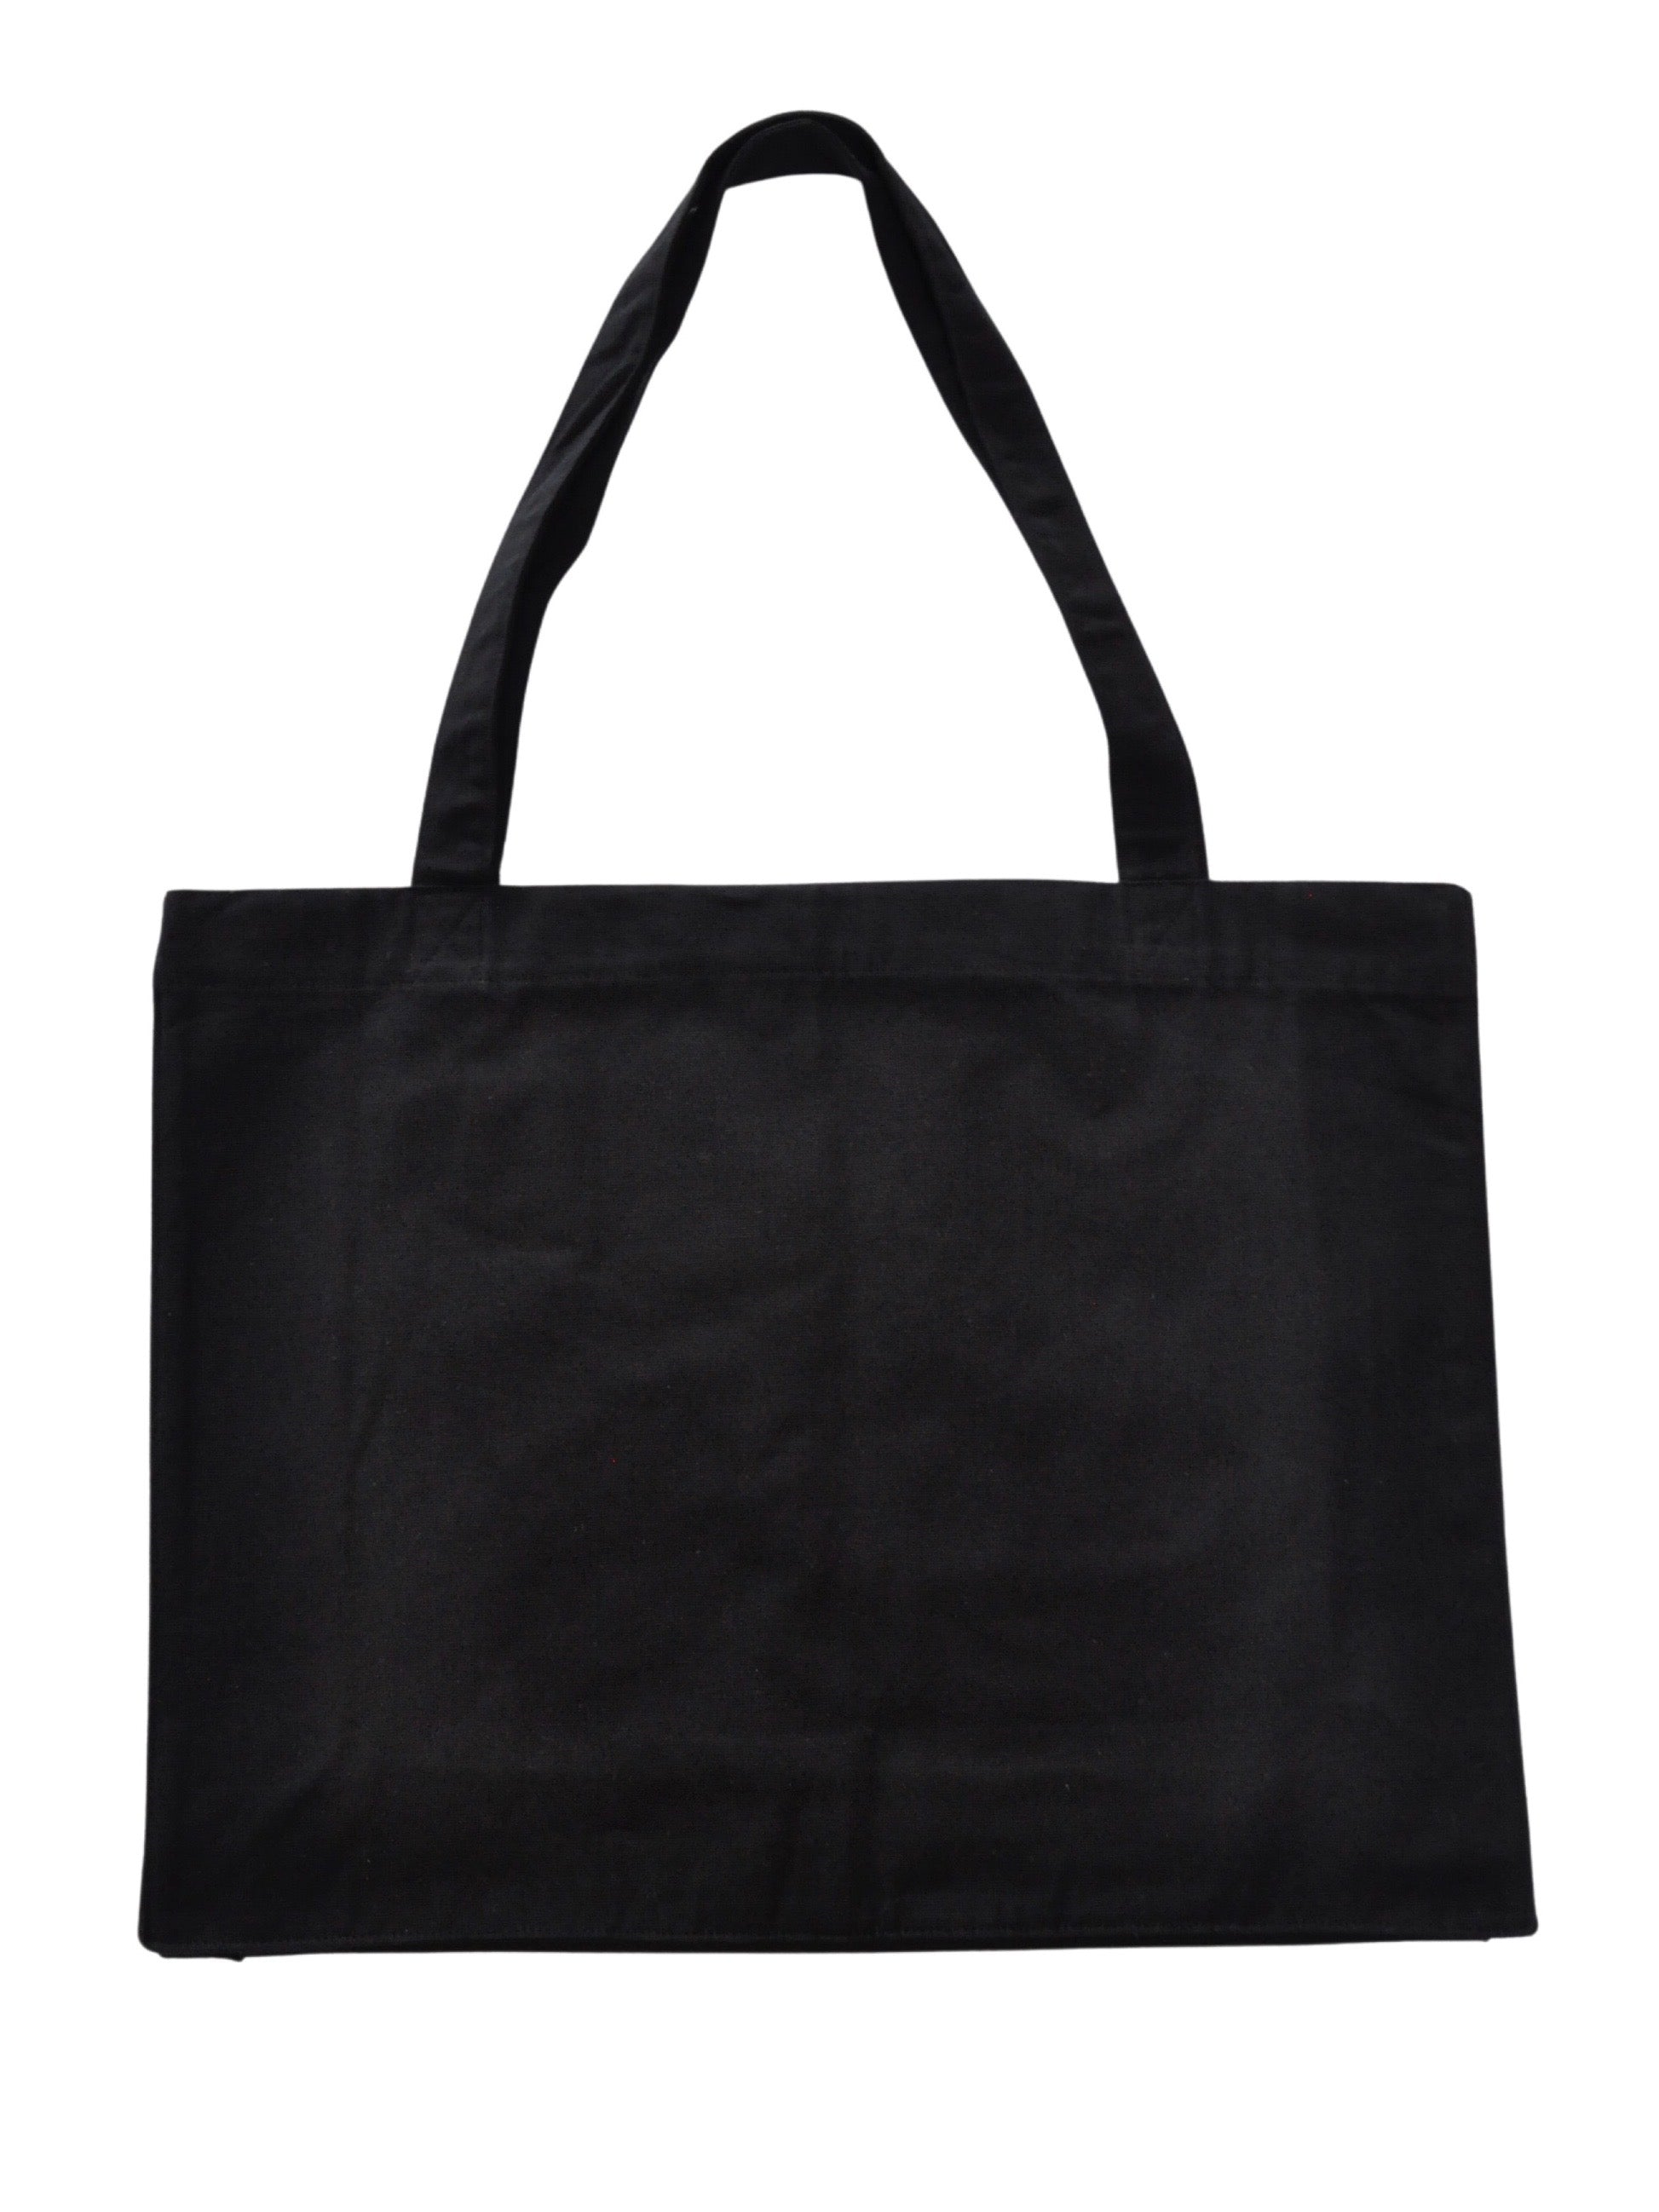 BY11 Recycled Cotton Canvas Tote Bag - Black